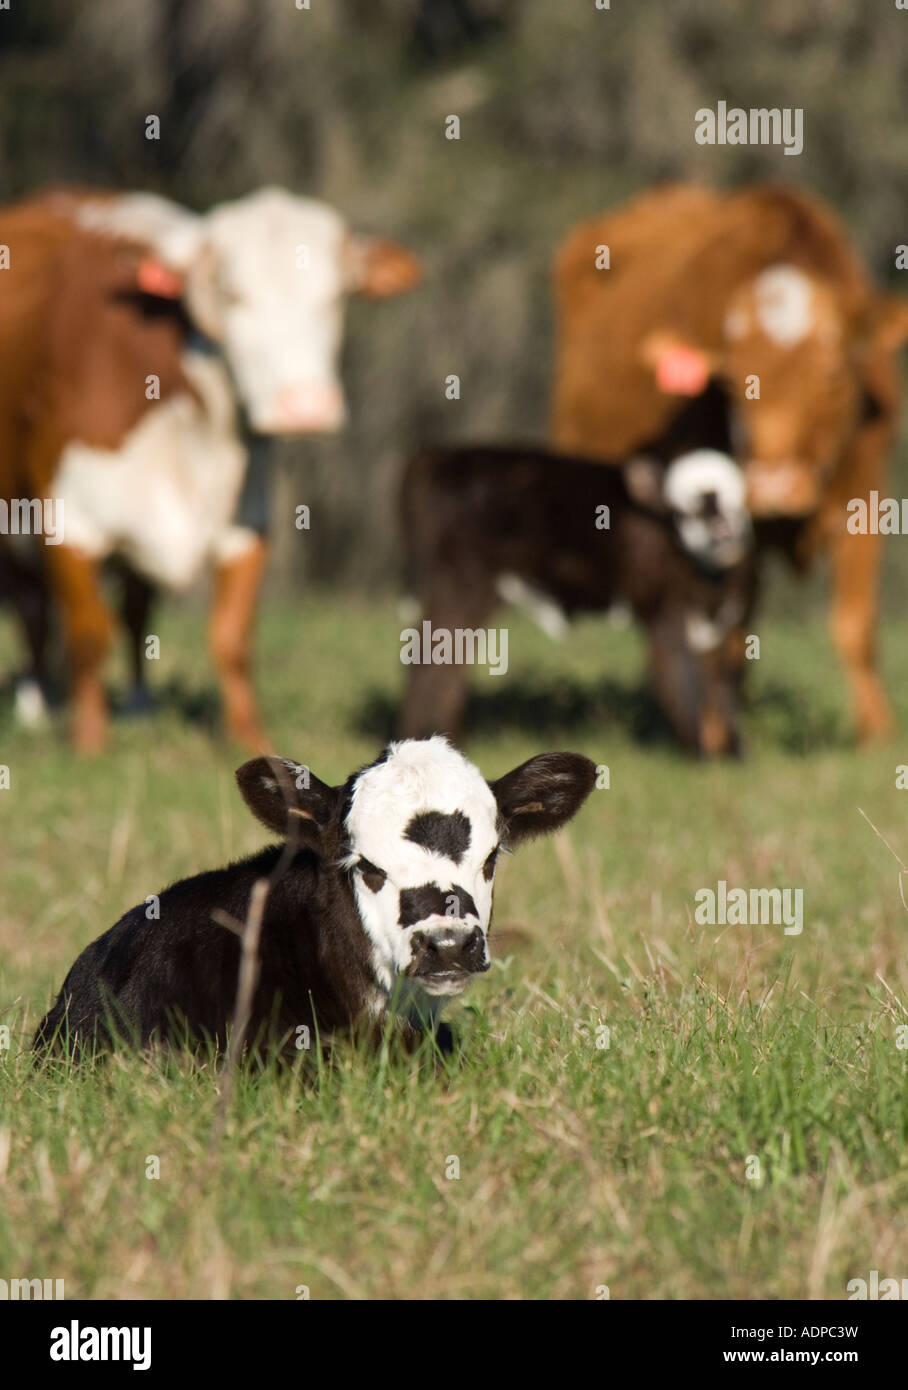 Commercial beef cattle with calves in pasture Stock Photo